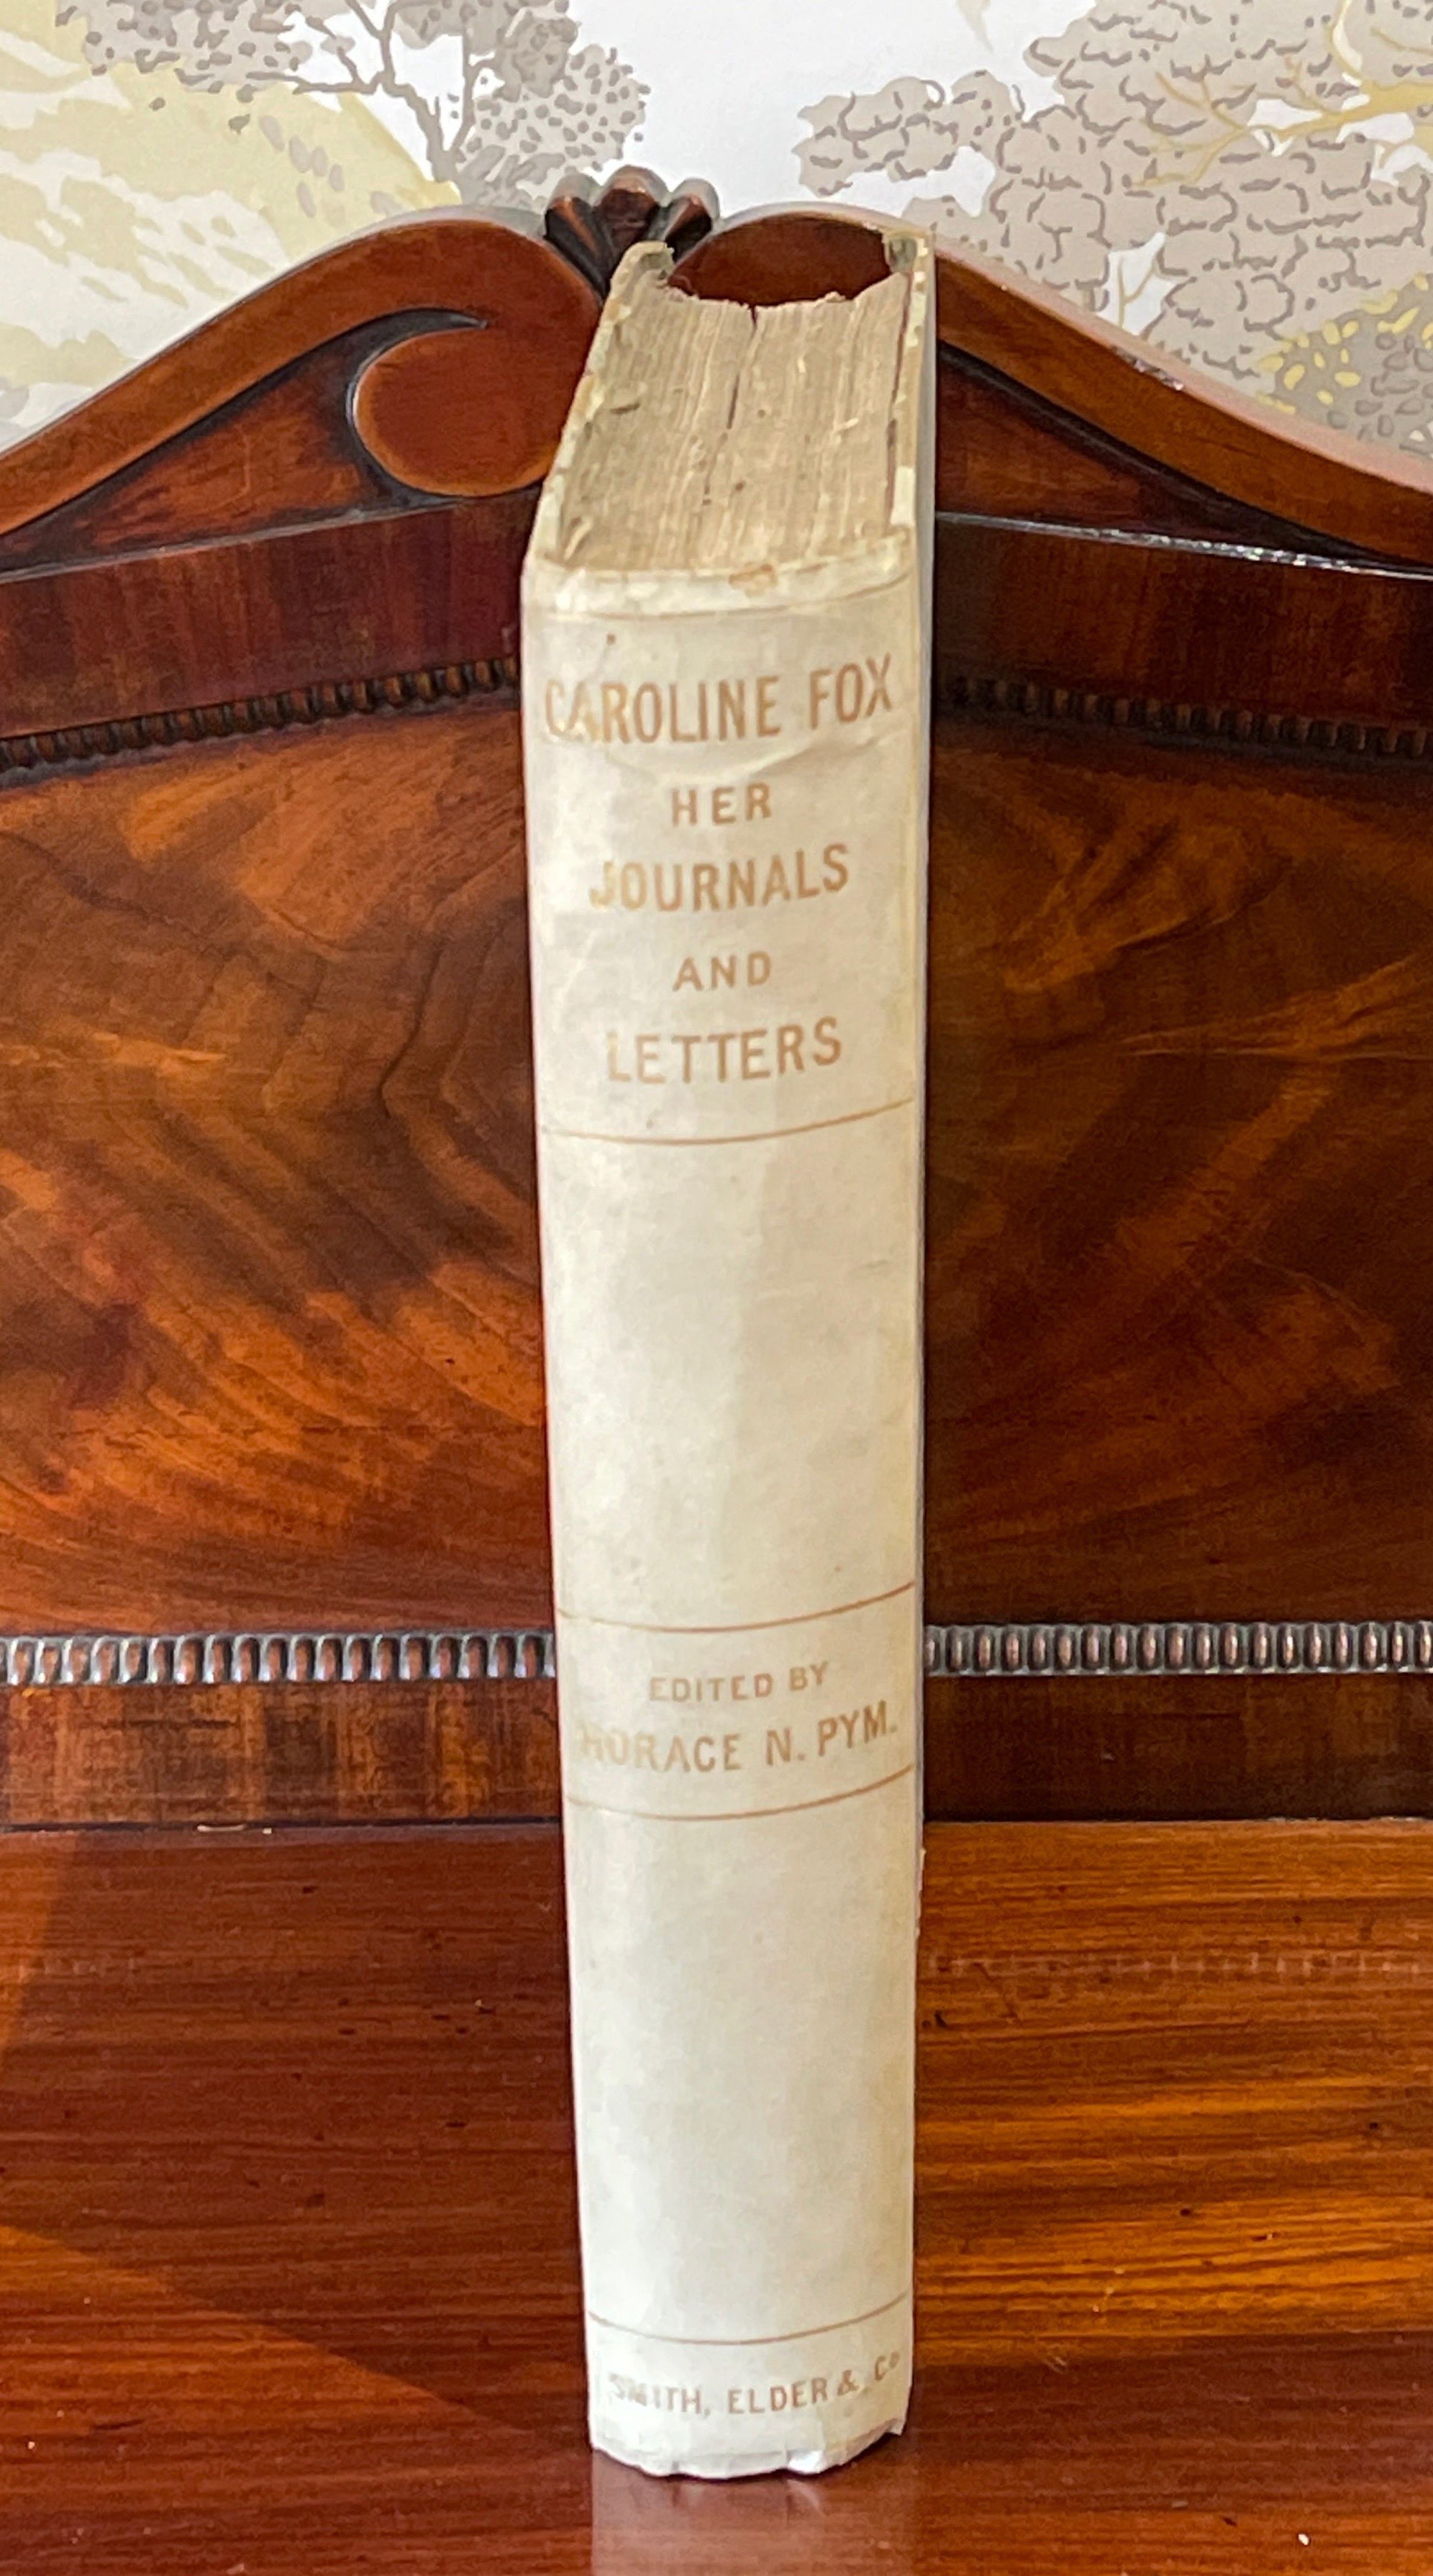 'Caroline Fox, her journals and letters, memories of old friends' edited by Horace N. Pym, published